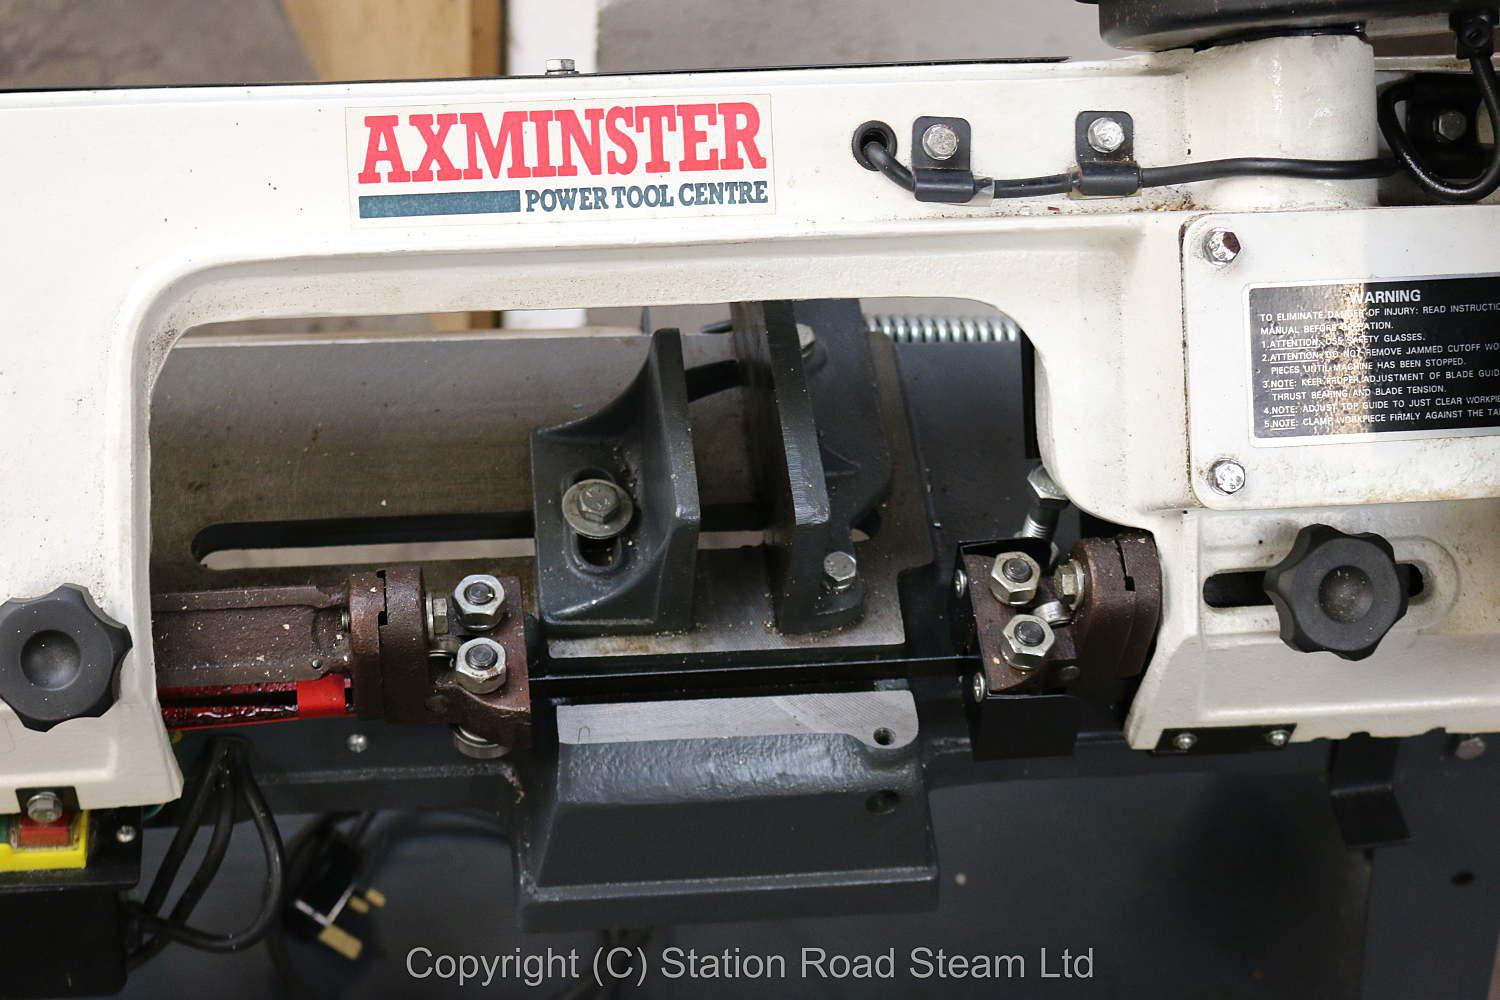 Axminster Power Tools bandsaw